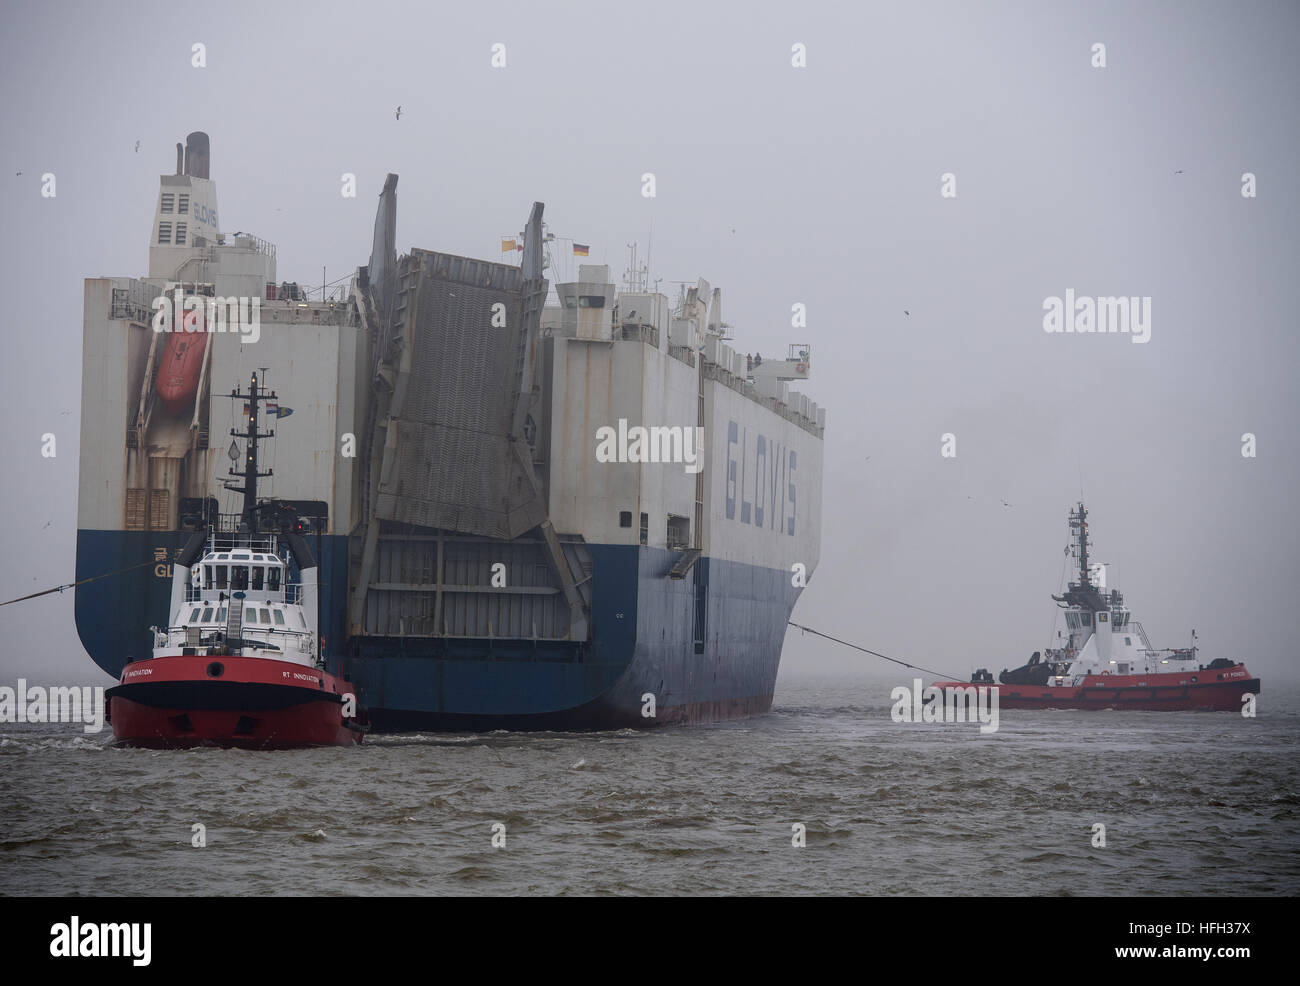 Bremerhaven, Germany. 31st Dec, 2016. The car transport ship 'Glovis Coron, ' wrecked in the storm 'Barbara, ' arrives in thick fog to the Kaiserschleuse lock in Bremerhaven, Germany, 31 December 2016. The Korean freighter, loaded with tanks, among other things, listed after the load shifted and became distressed at sea off the East Frisian island of Wangerooge. By adjusting the ballast water tank, the list could be reduced from 15 to 5 degrees. Experts will secure and re-lash the load in Bremerhaven. Photo: Ingo Wagner/dpa/Alamy Live News Stock Photo